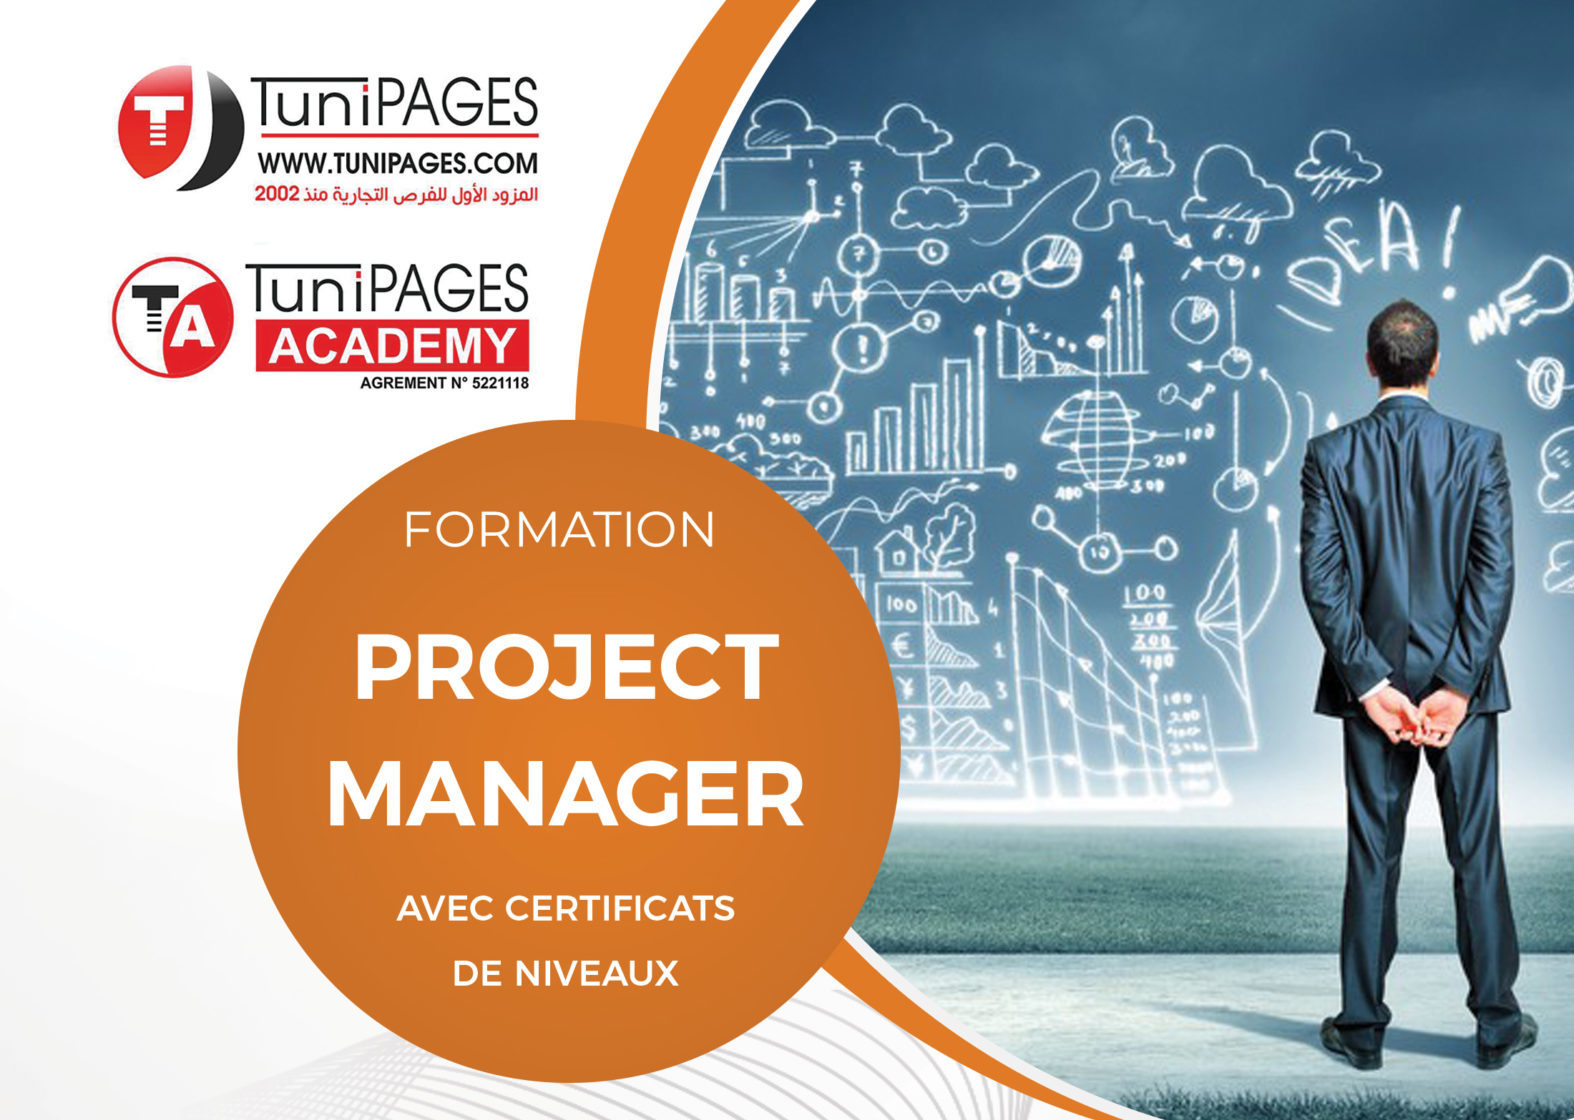 Formation Project Manager à Tunis  Tunipages